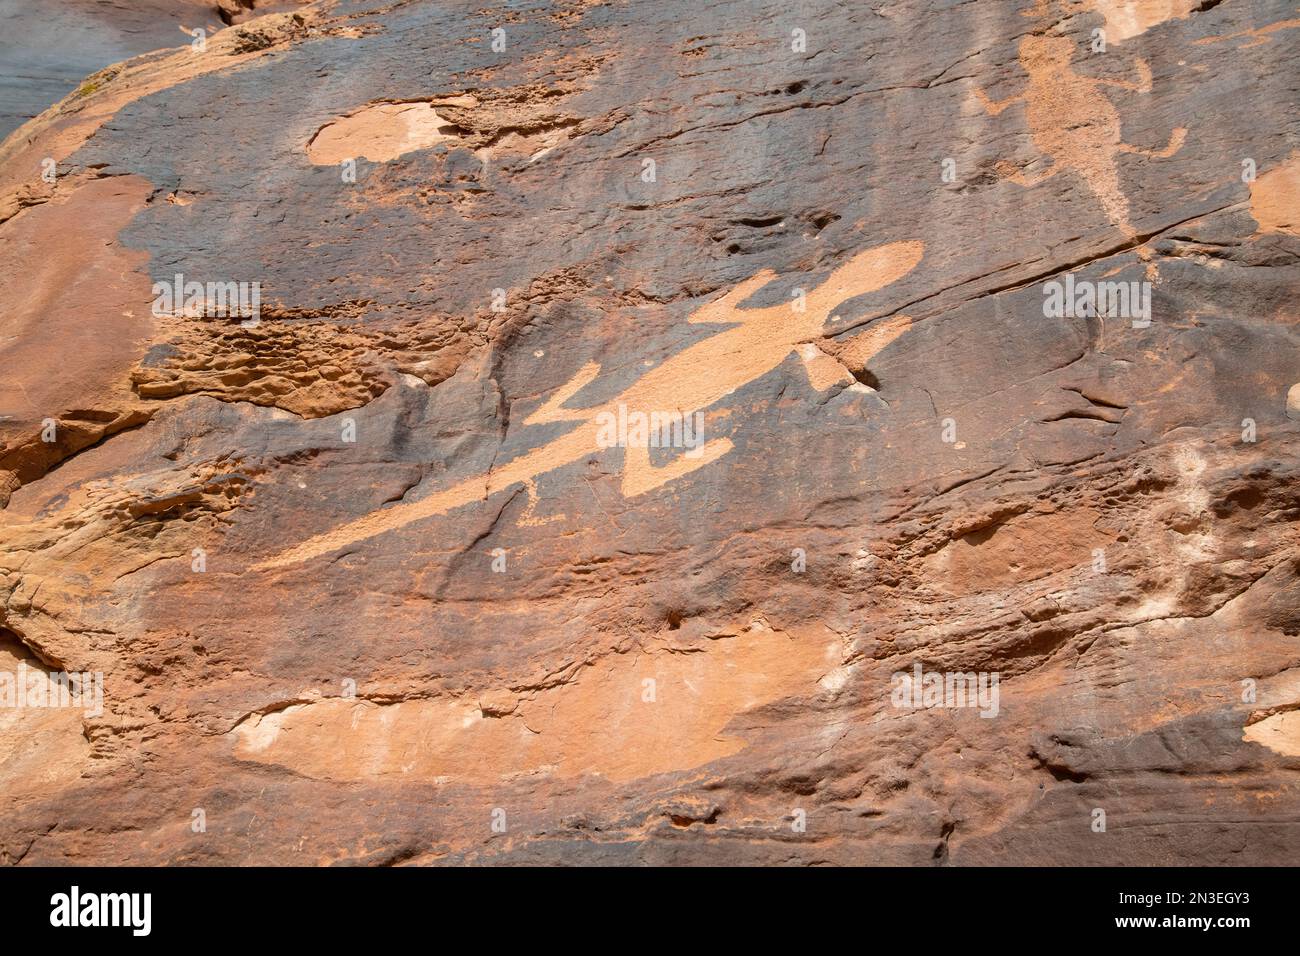 Ancient petroglyphs depicting lizards on a rock face in Dinosaur National Monument; Utah, United States of America Stock Photo